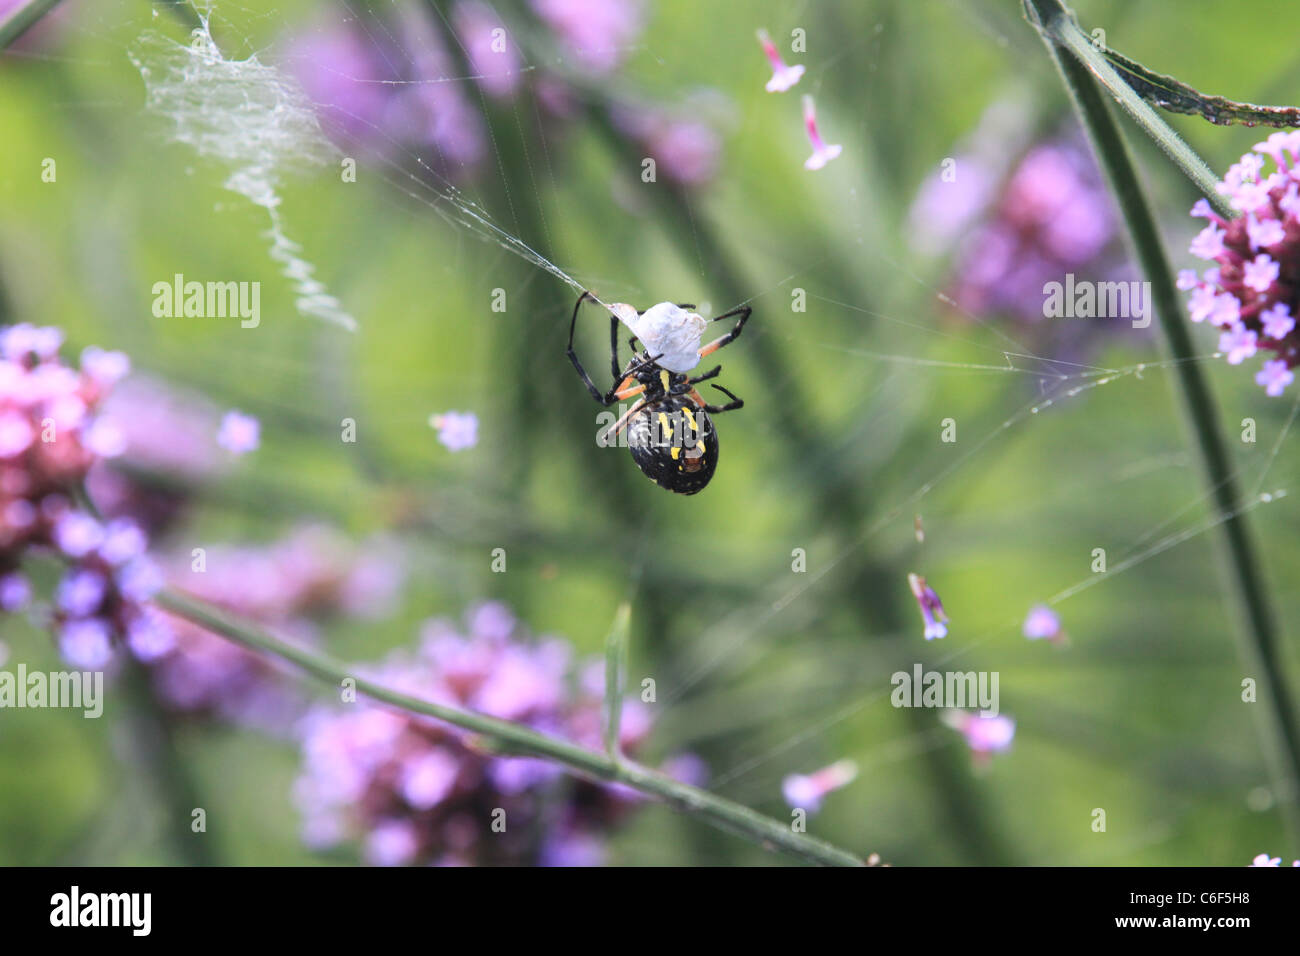 Spider on a web, rolling up an insect Stock Photo